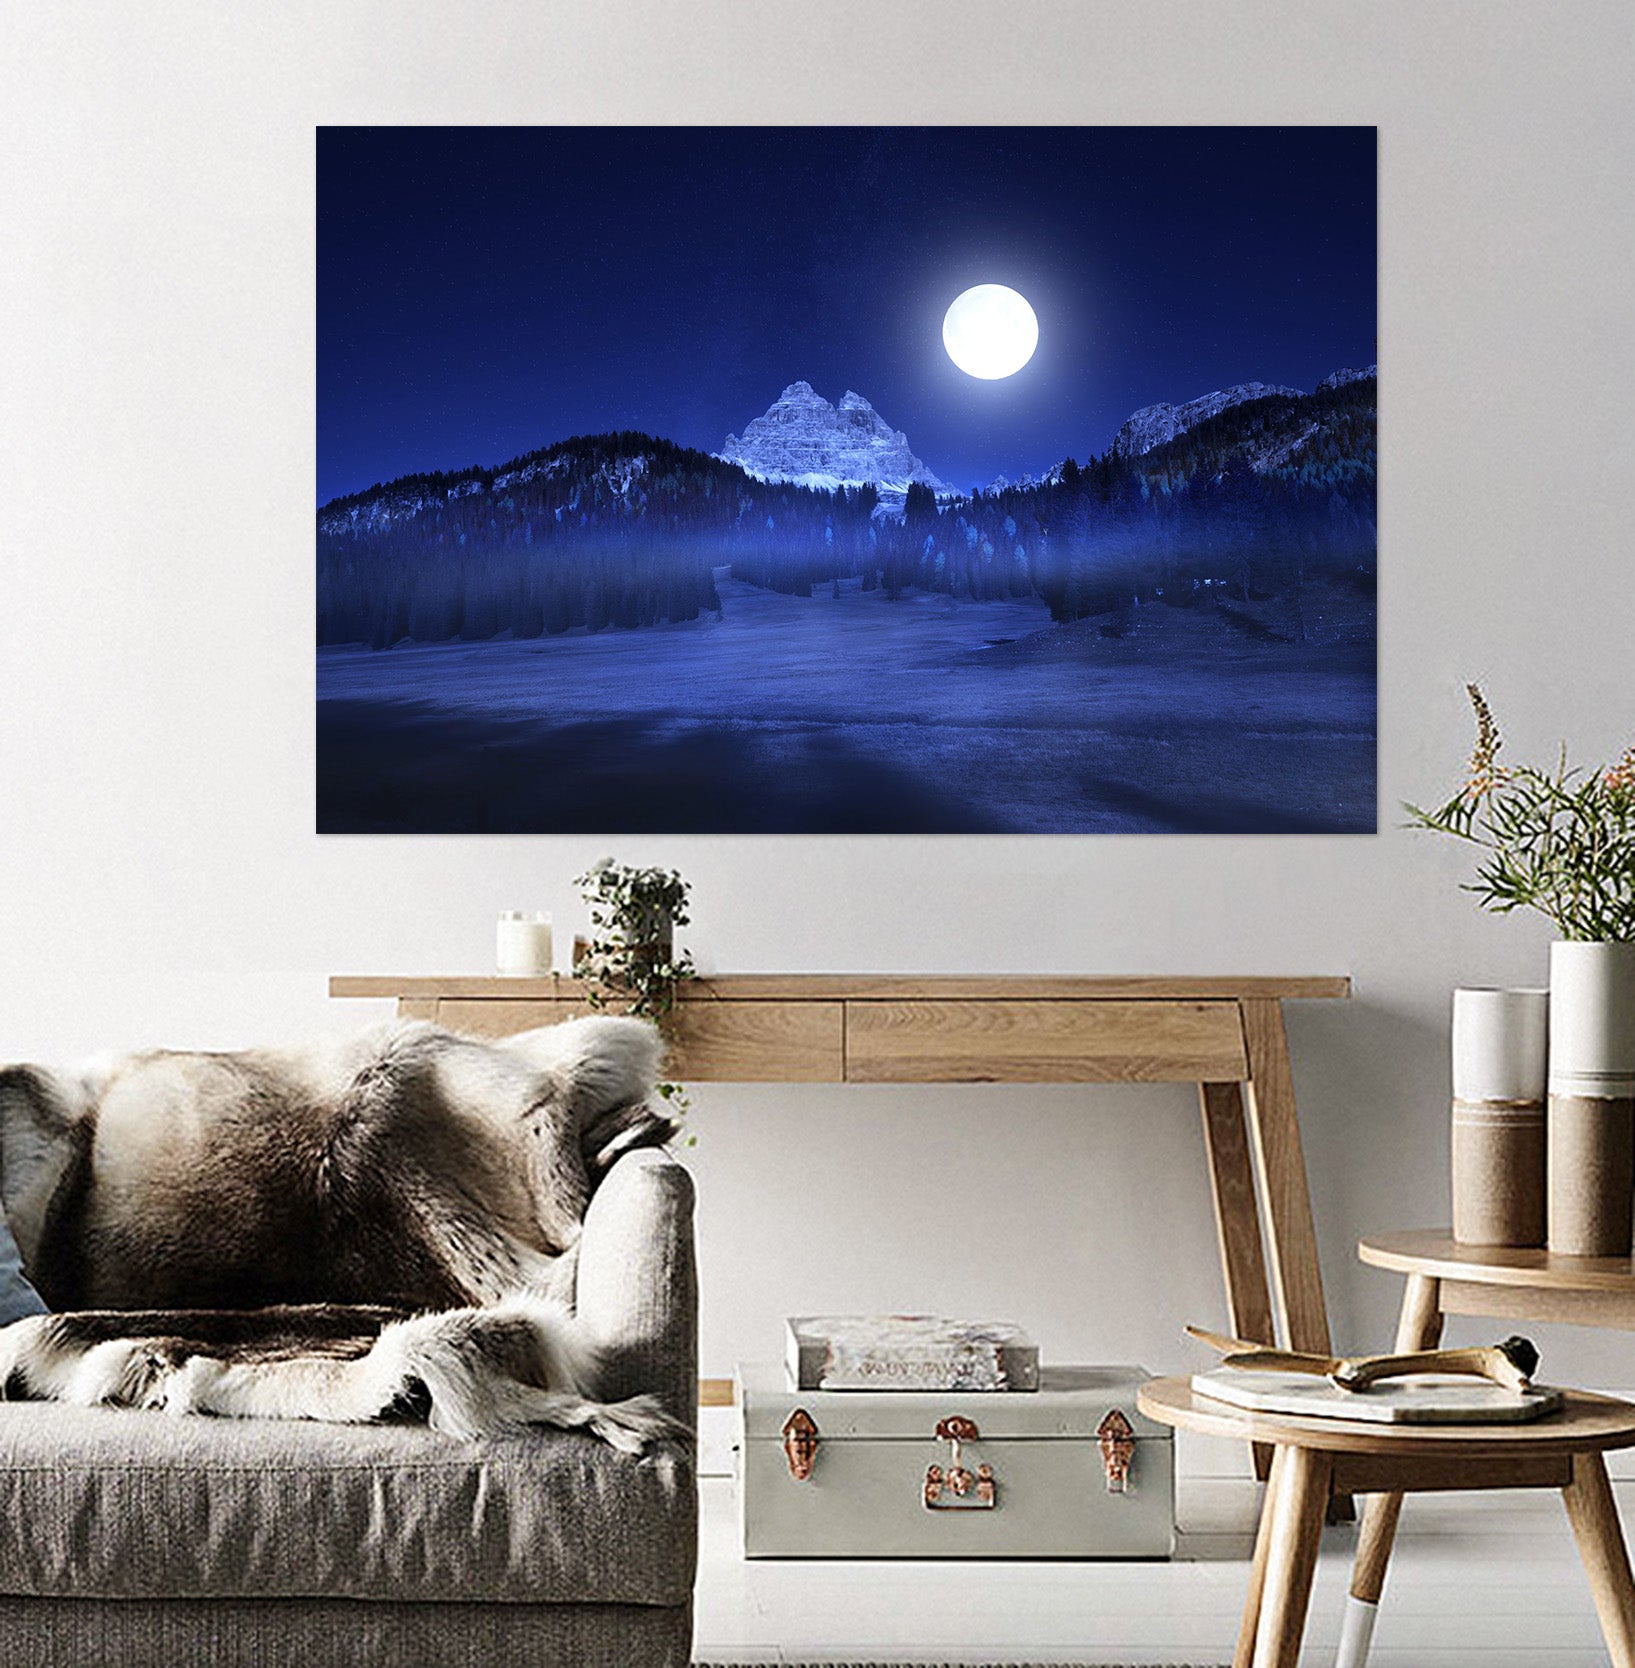 3D Silent Valley 217 Marco Carmassi Wall Sticker